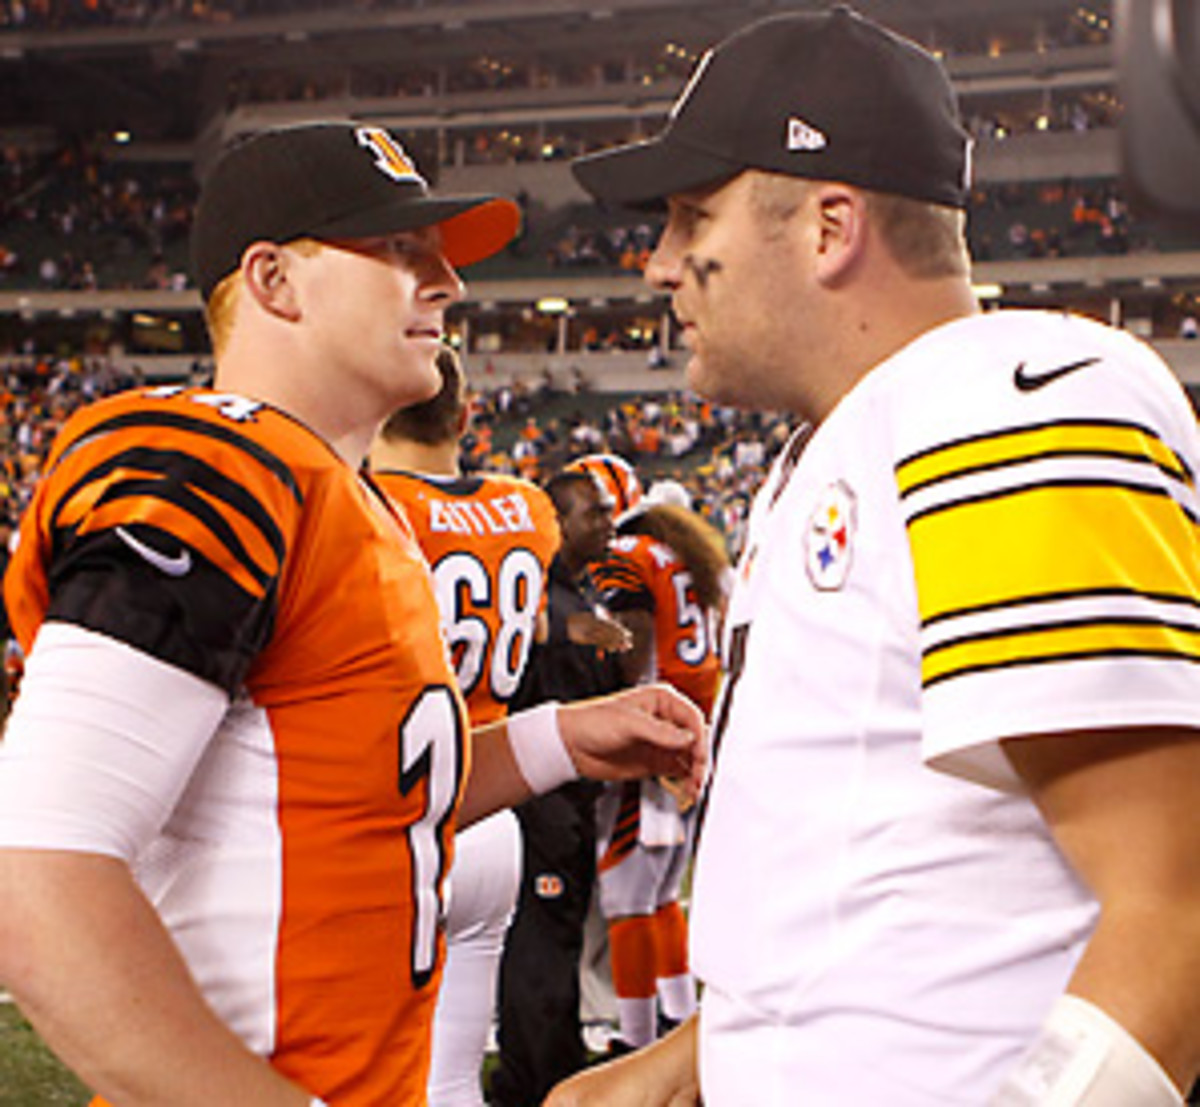 Andy Dalton and Ben Roethlisberger will meet with a likely playoff berth on the line this week. (Frank Victores-US PRESSWIRE)